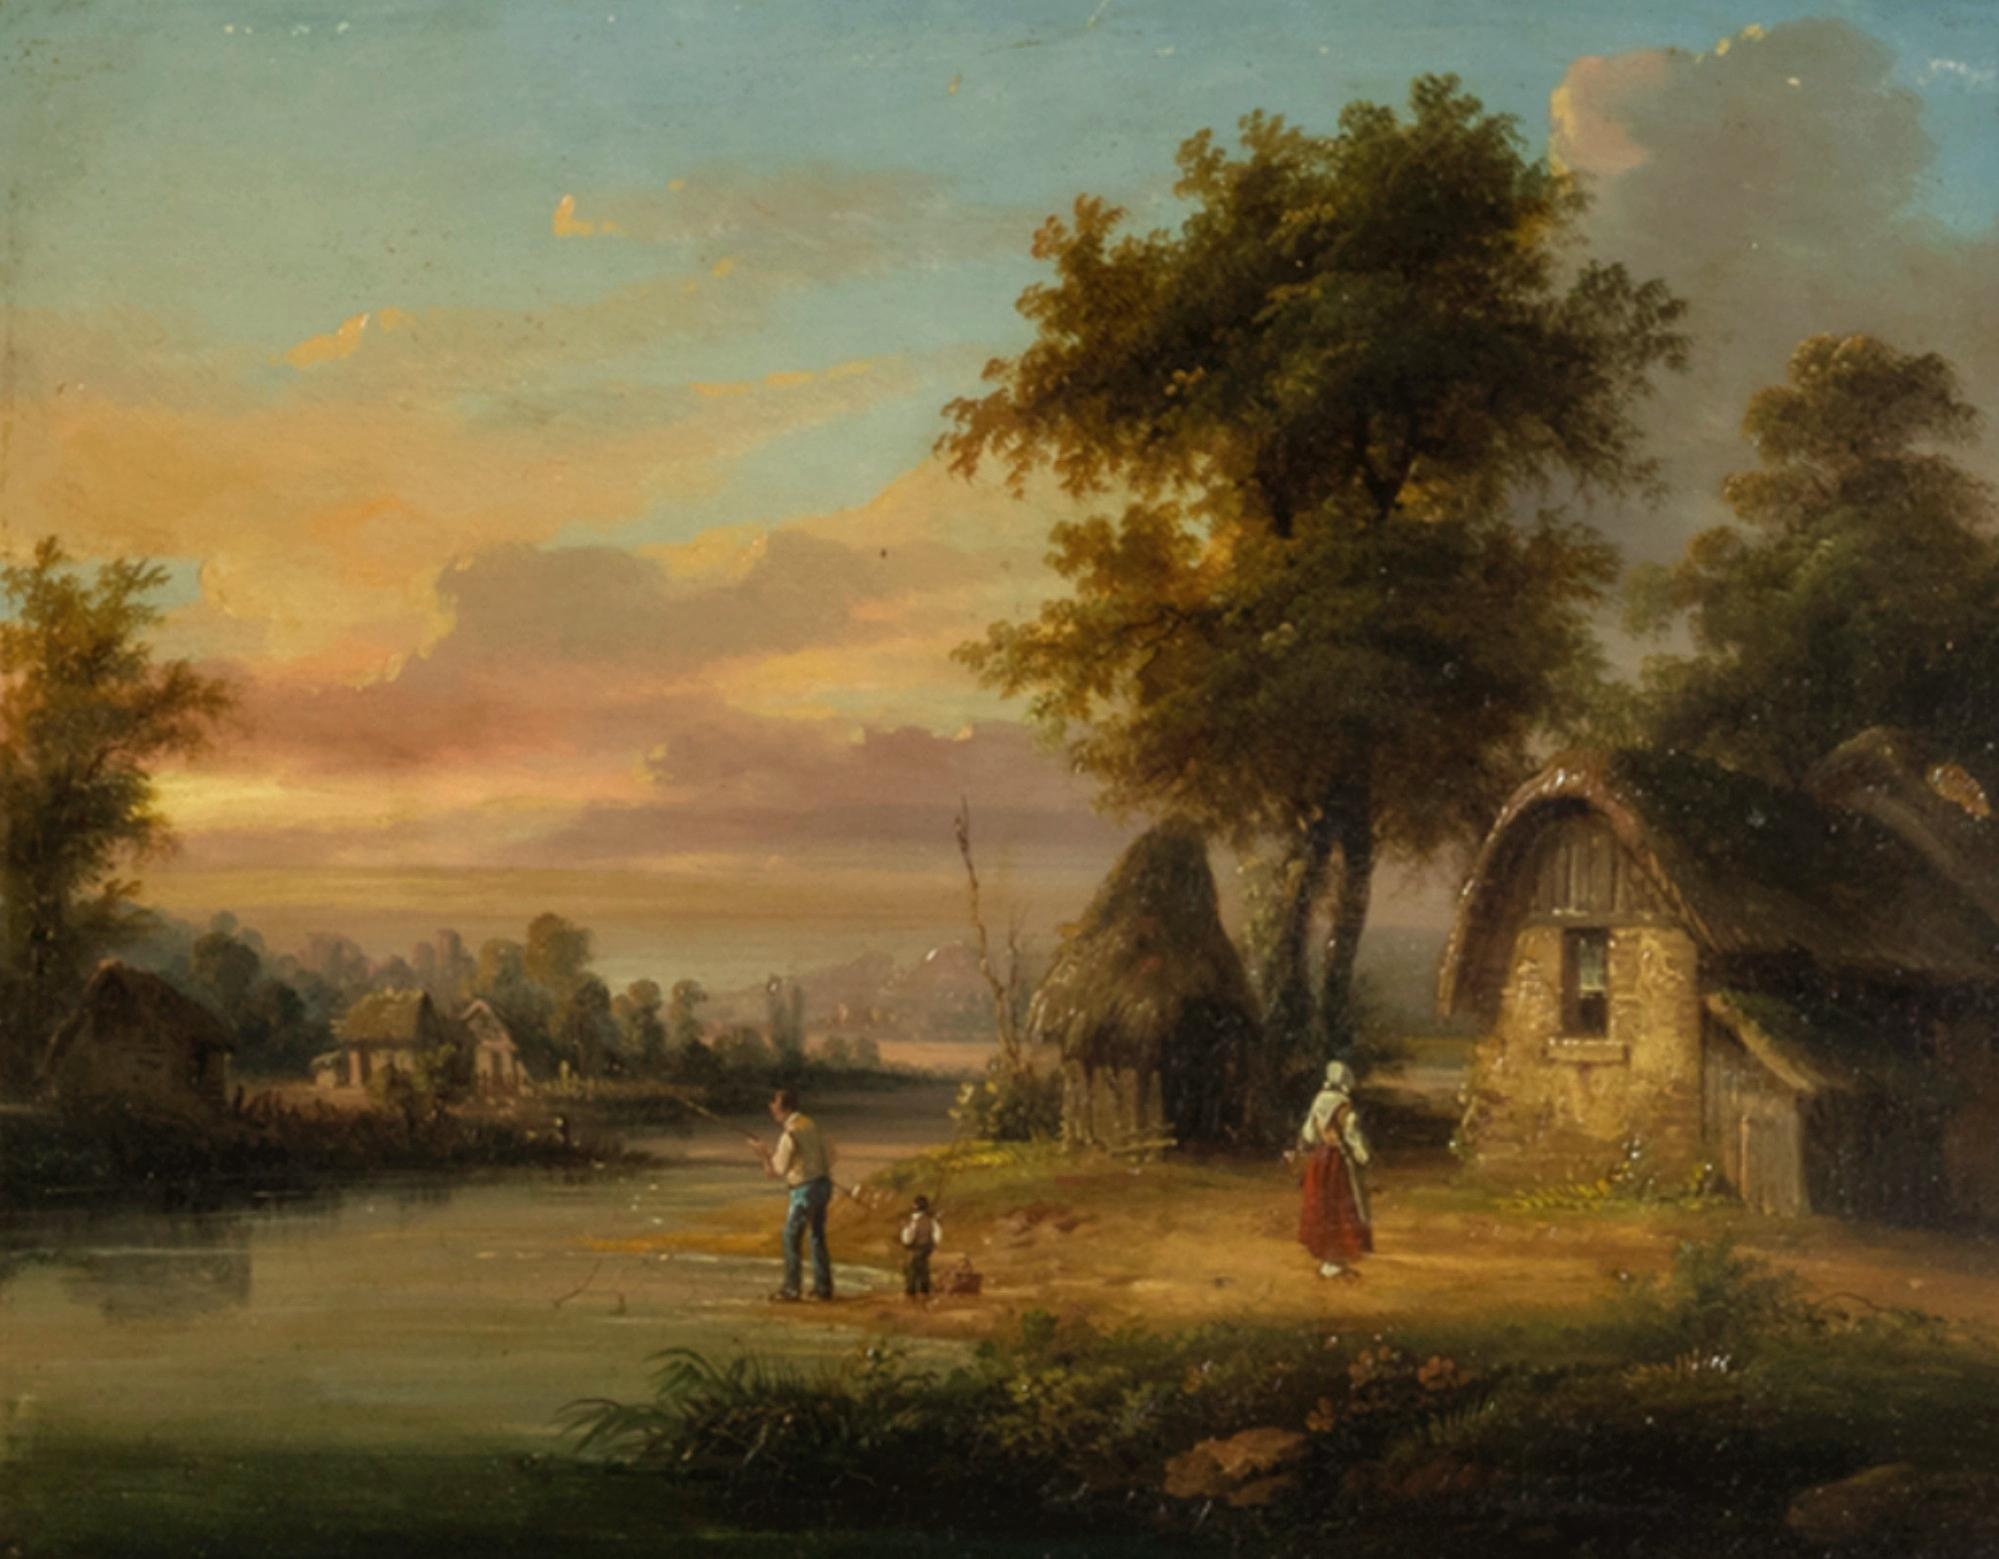 A melancholic variant painting titled «Villaggio Sul Lago» by the french artist Henri Bellery-Desfontaines depicting a family scene with the father and son fishing in the river shore while ther mother walks to the family house. 

Henri